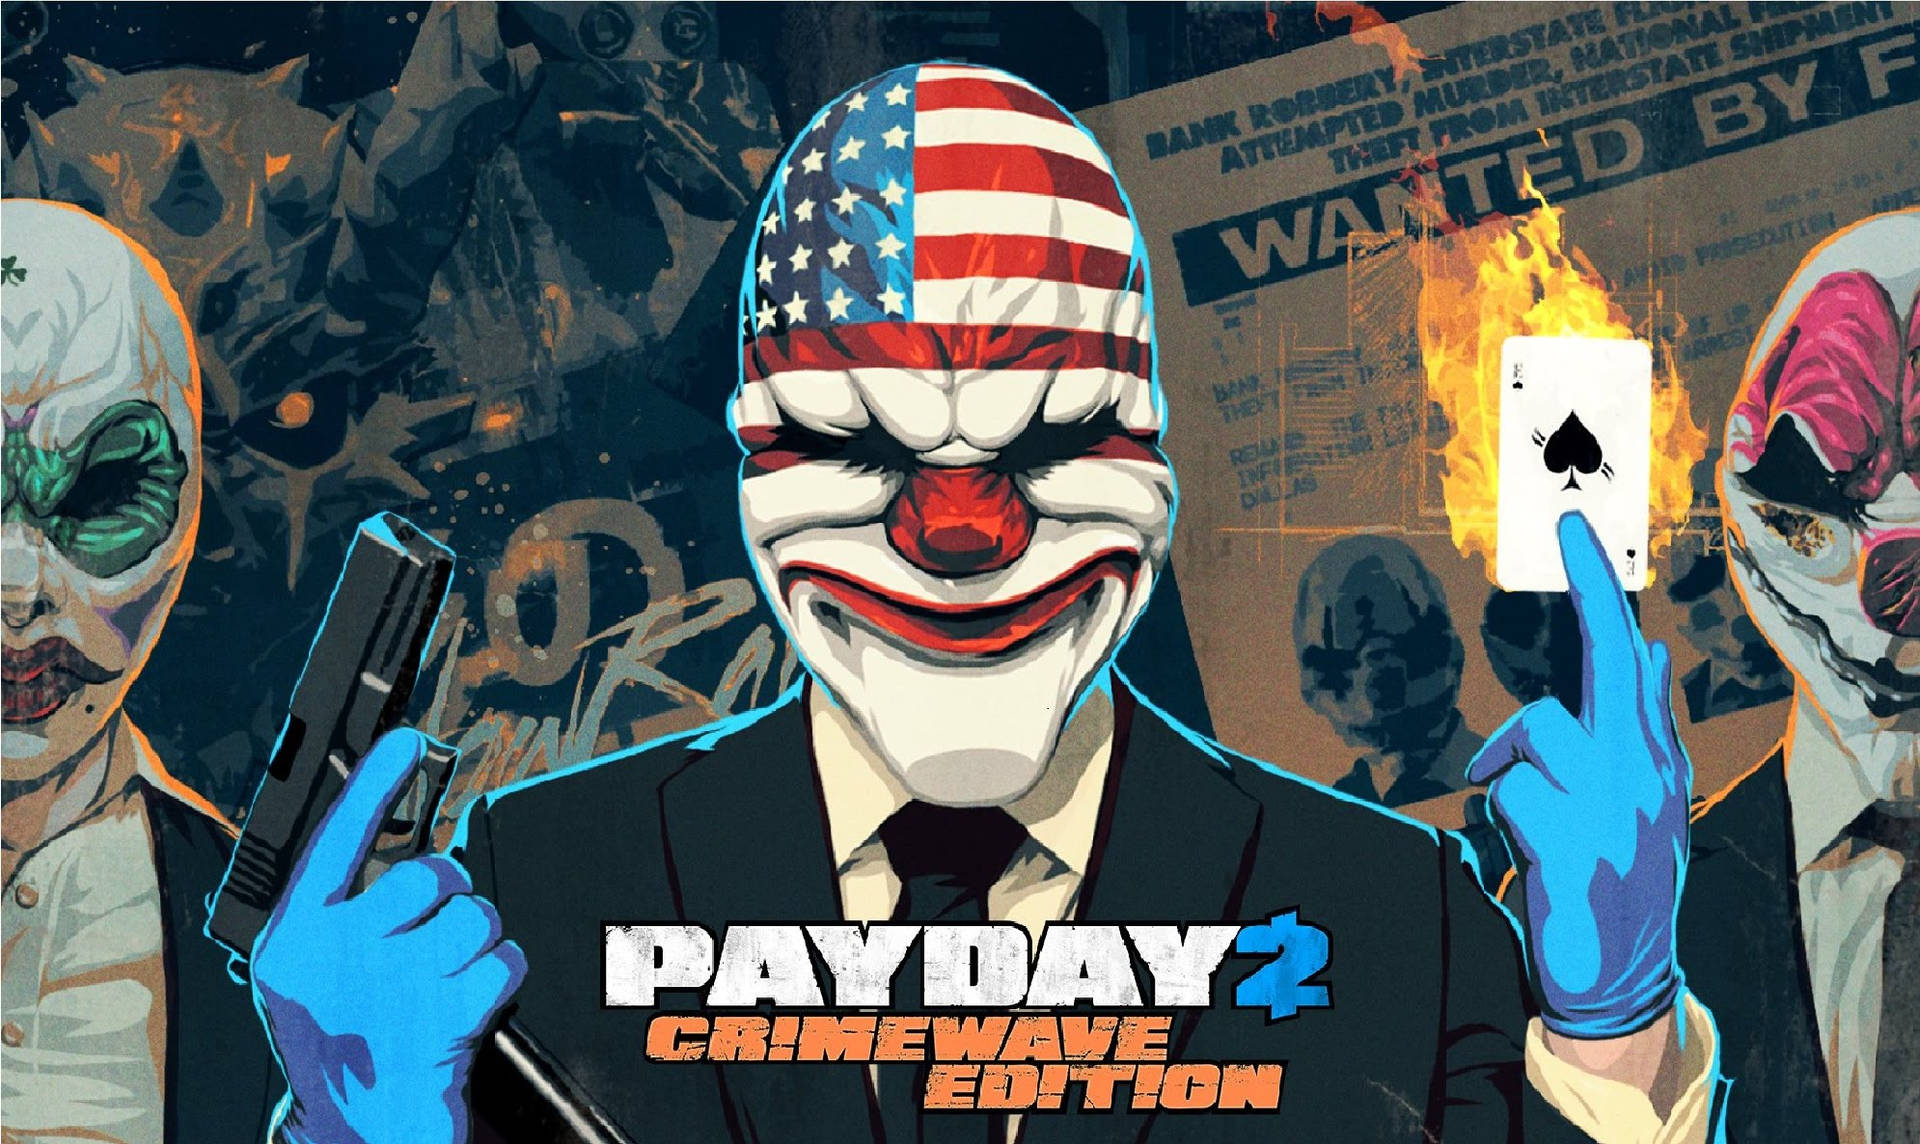 Video Game Payday 2 Crimewave Edition Poster Wallpaper